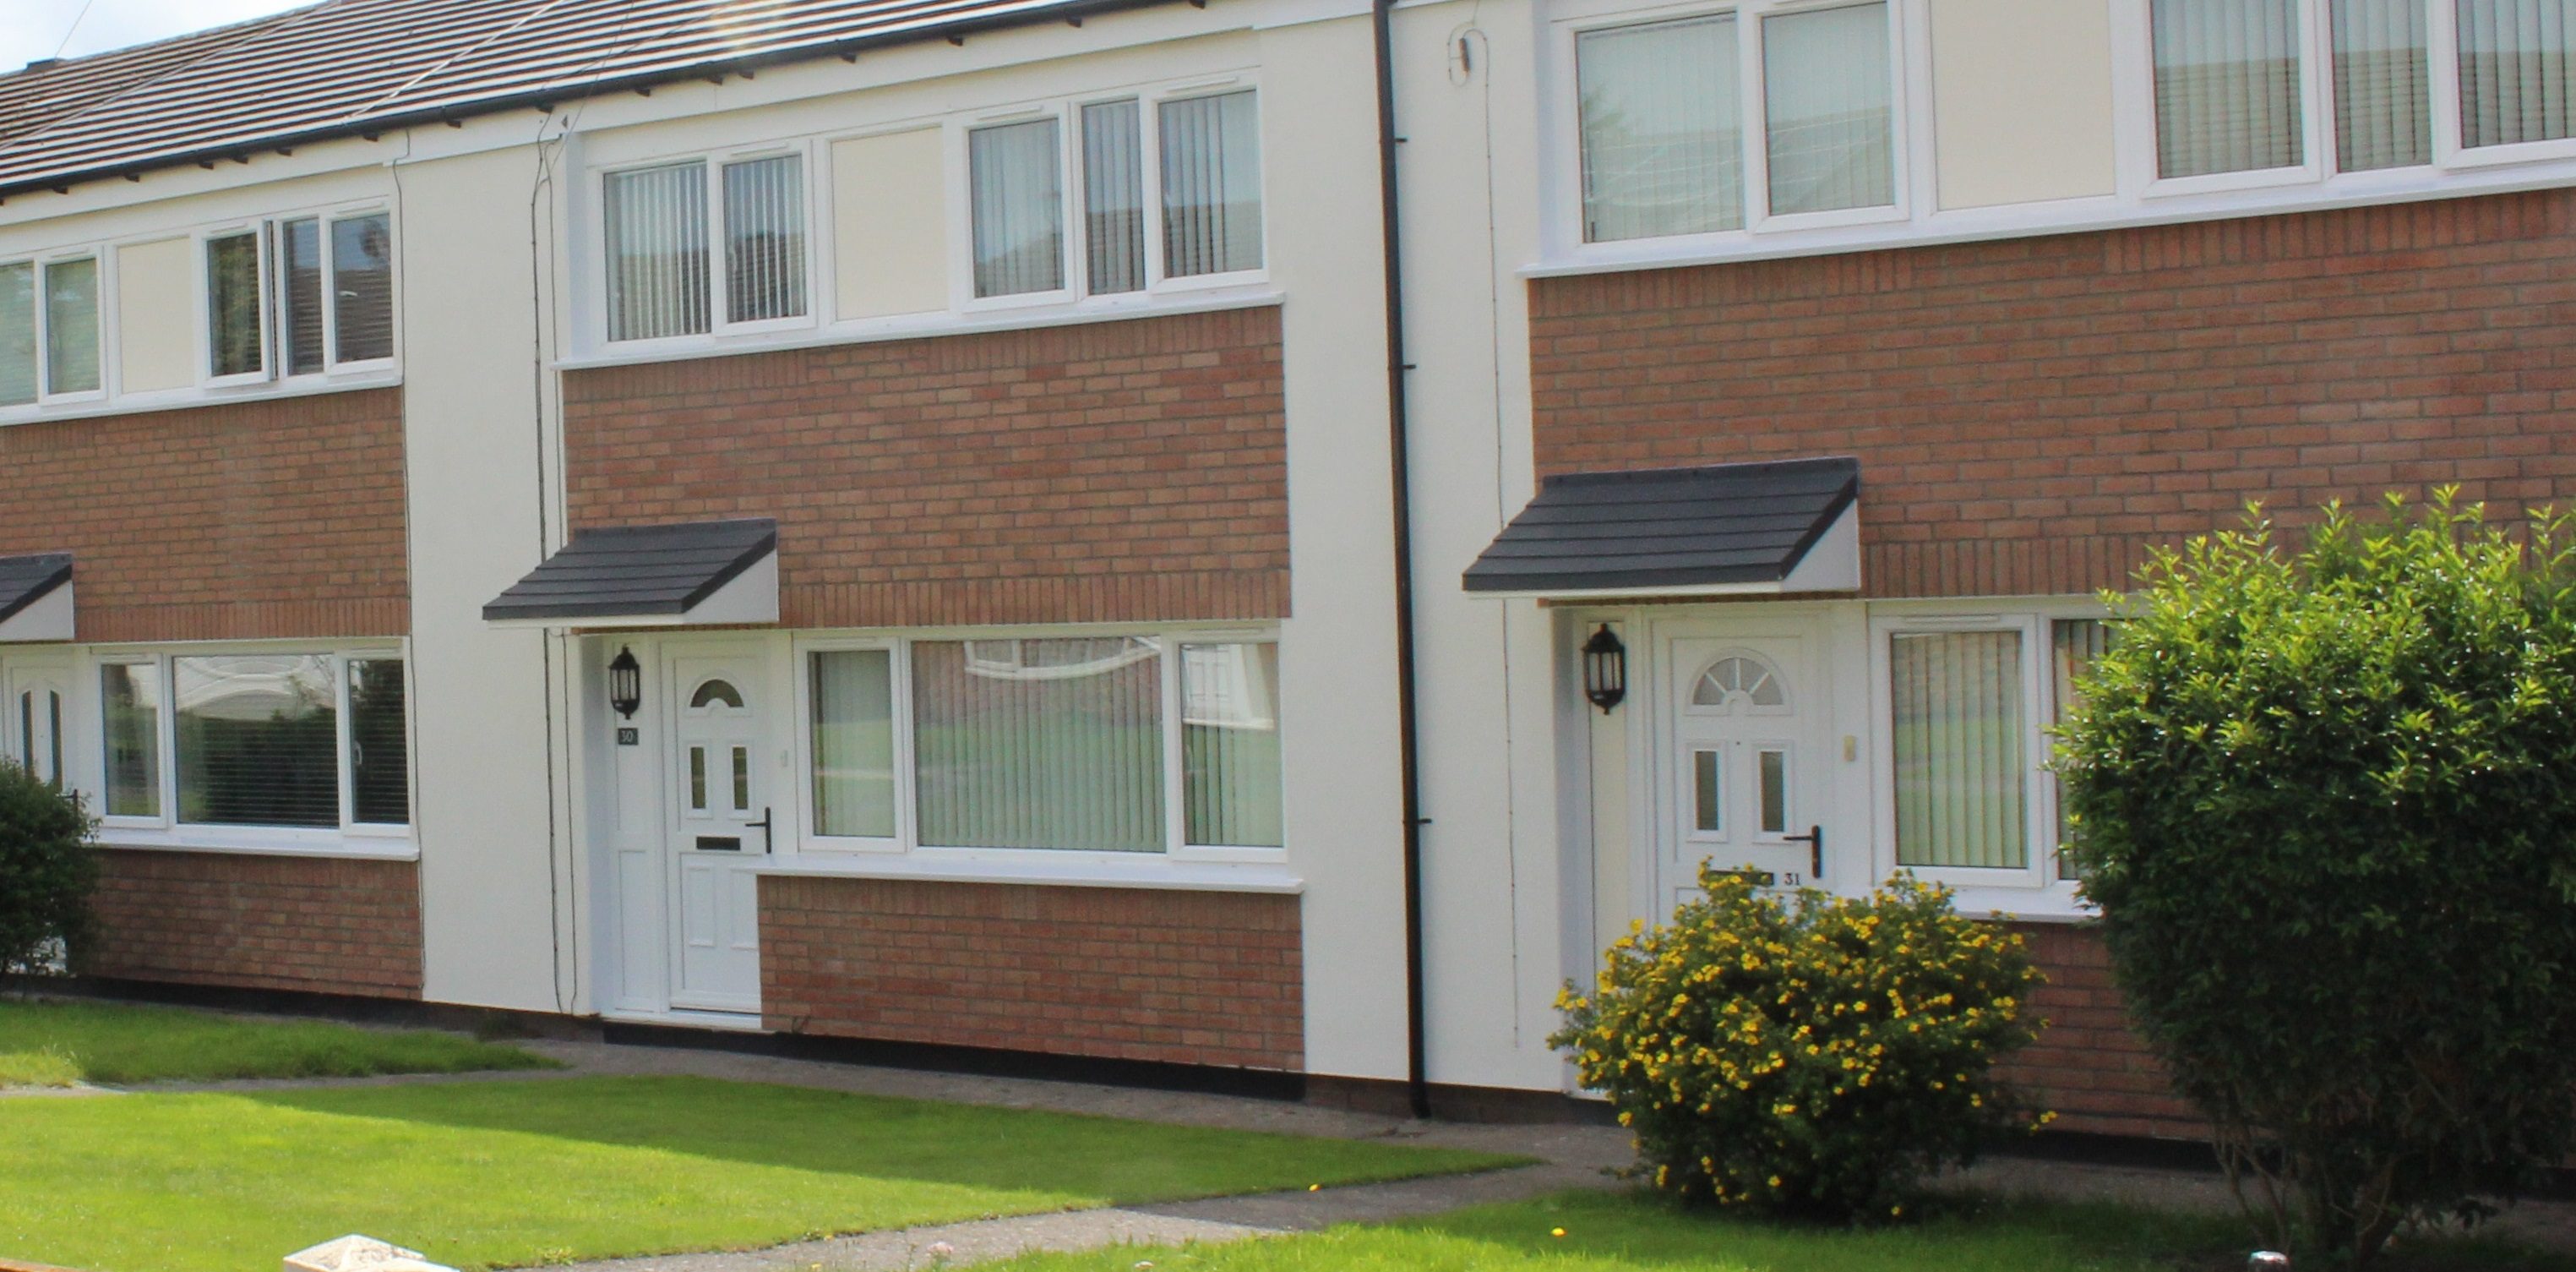 See the difference our housing improvements project has made to these homes...